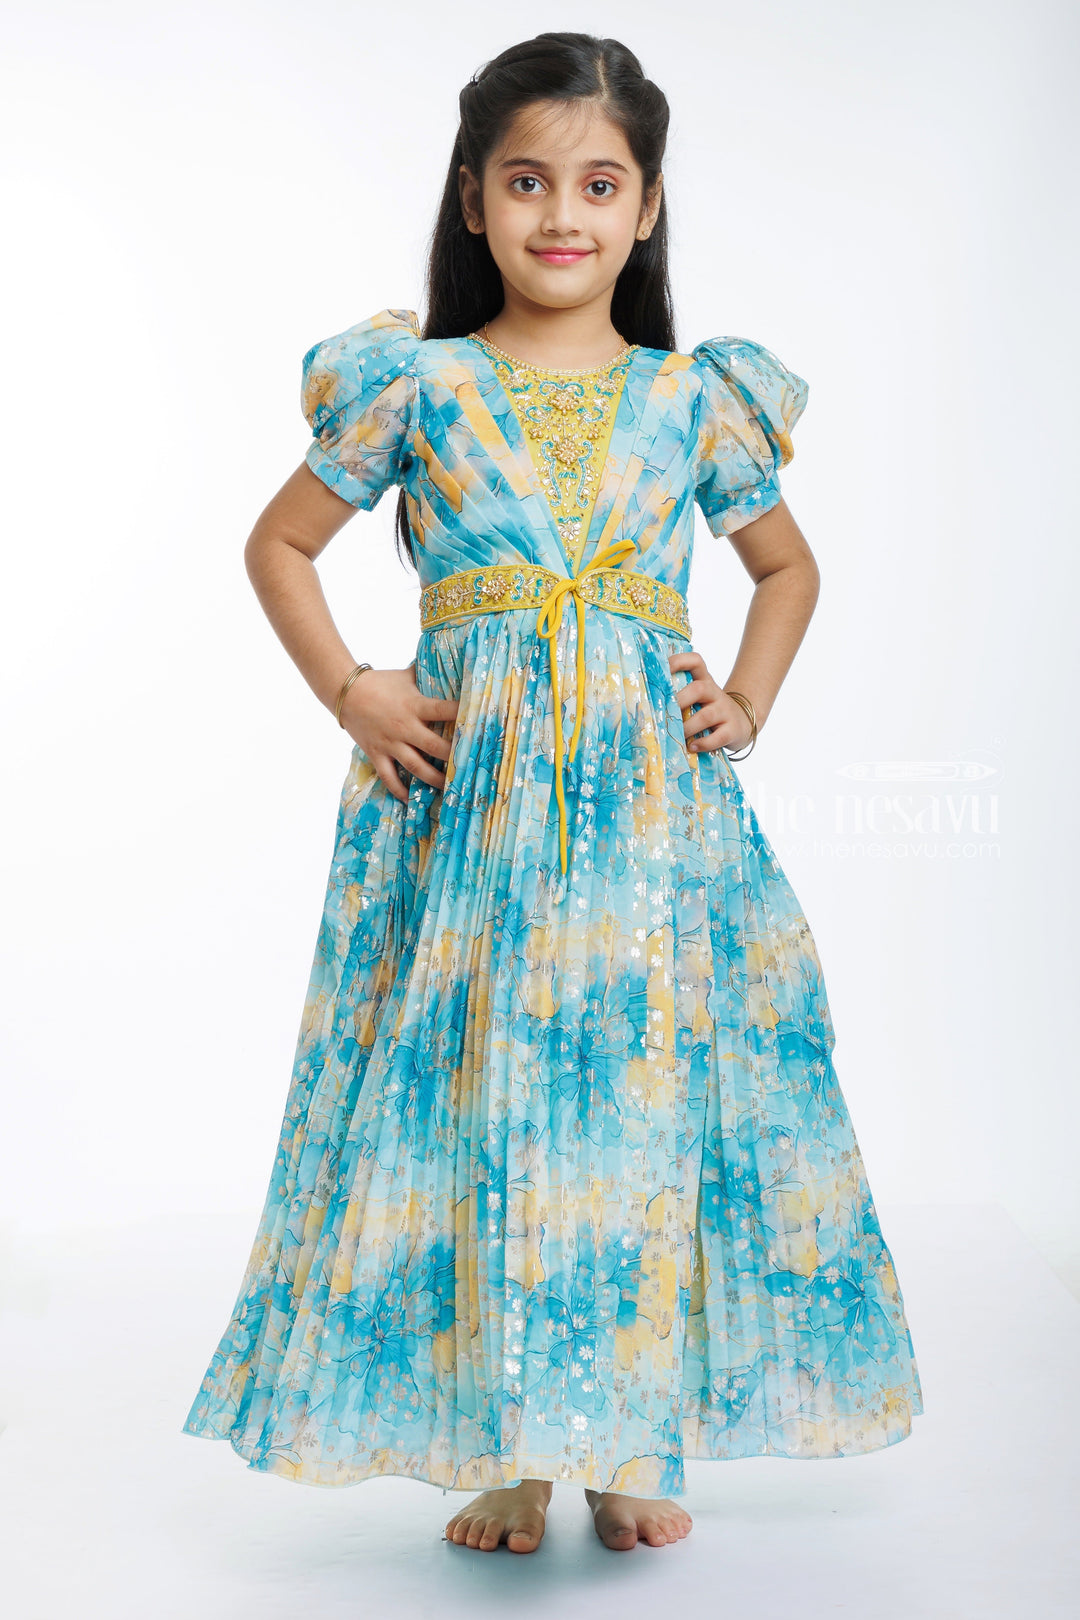 The Nesavu Girls Party Gown Sunshine Blossom Girls Anarkali Gown - A Whimsical Floral Dream Nesavu 24 (5Y) / Blue / Georgette GA195A-24 Whimsical Floral Girls Anarkali Gown | Enchanting Party Wear | The Nesavu